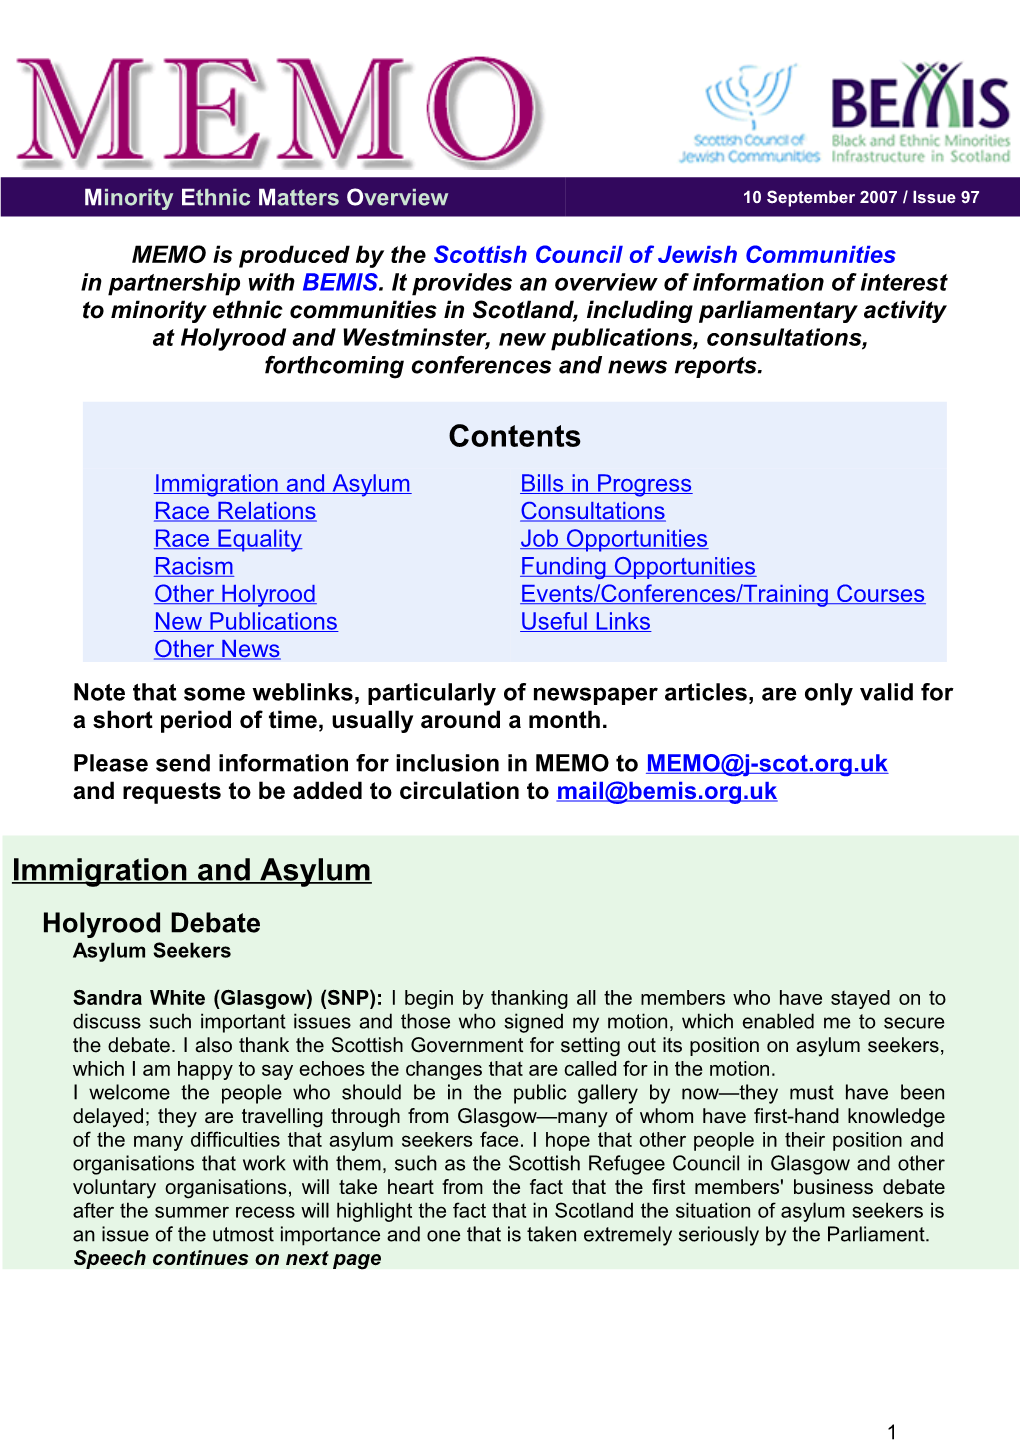 MEMO Is Produced by the Scottish Council of Jewish Communities